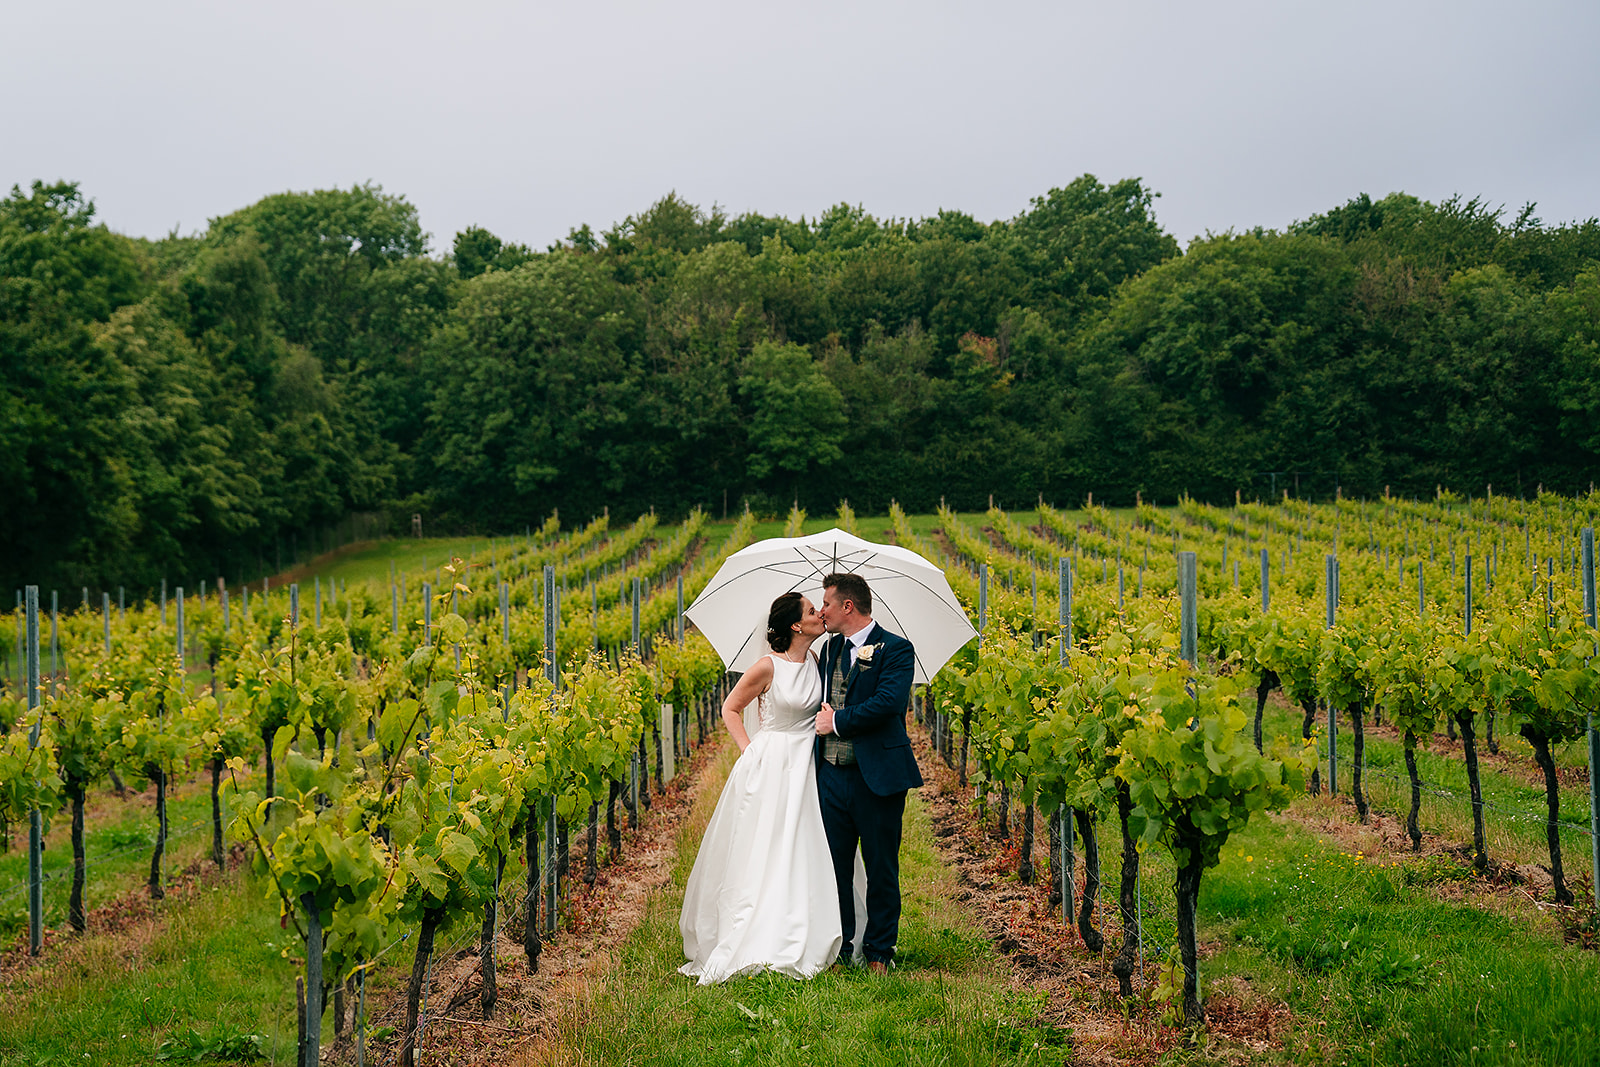 A couple stands under a white umbrella, embracing in the middle of a vineyard with rows of grapevines stretching out behind them and trees in the background.